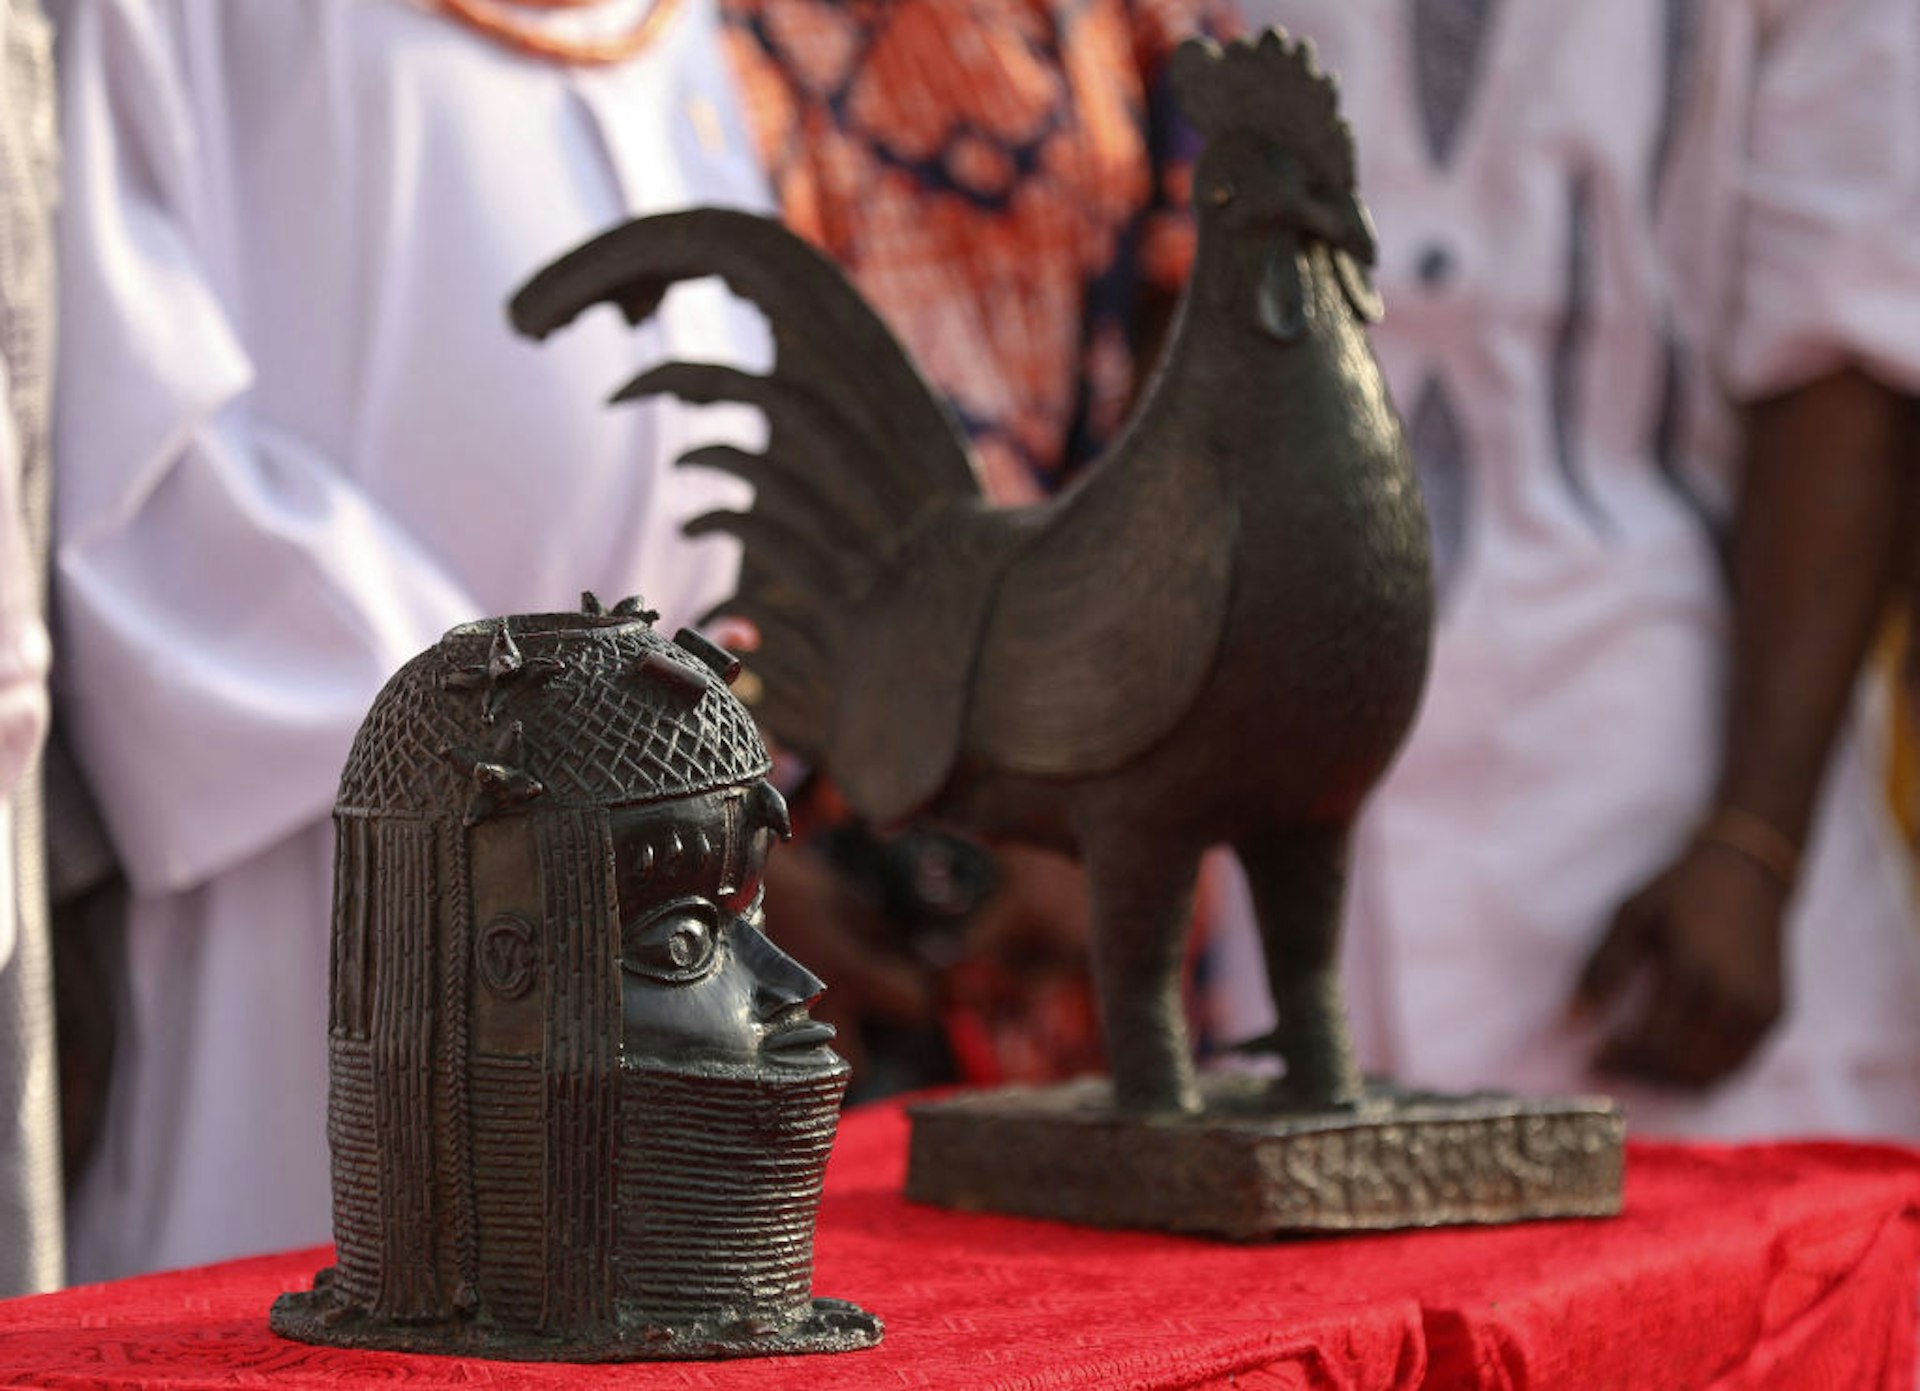 The two artifacts, which include a bronze cockerel and a bust that were looted from Nigeria over 125 years ago by the British military force, are placed on a table inside the Oba of Benin palace where it was looted in Benin City